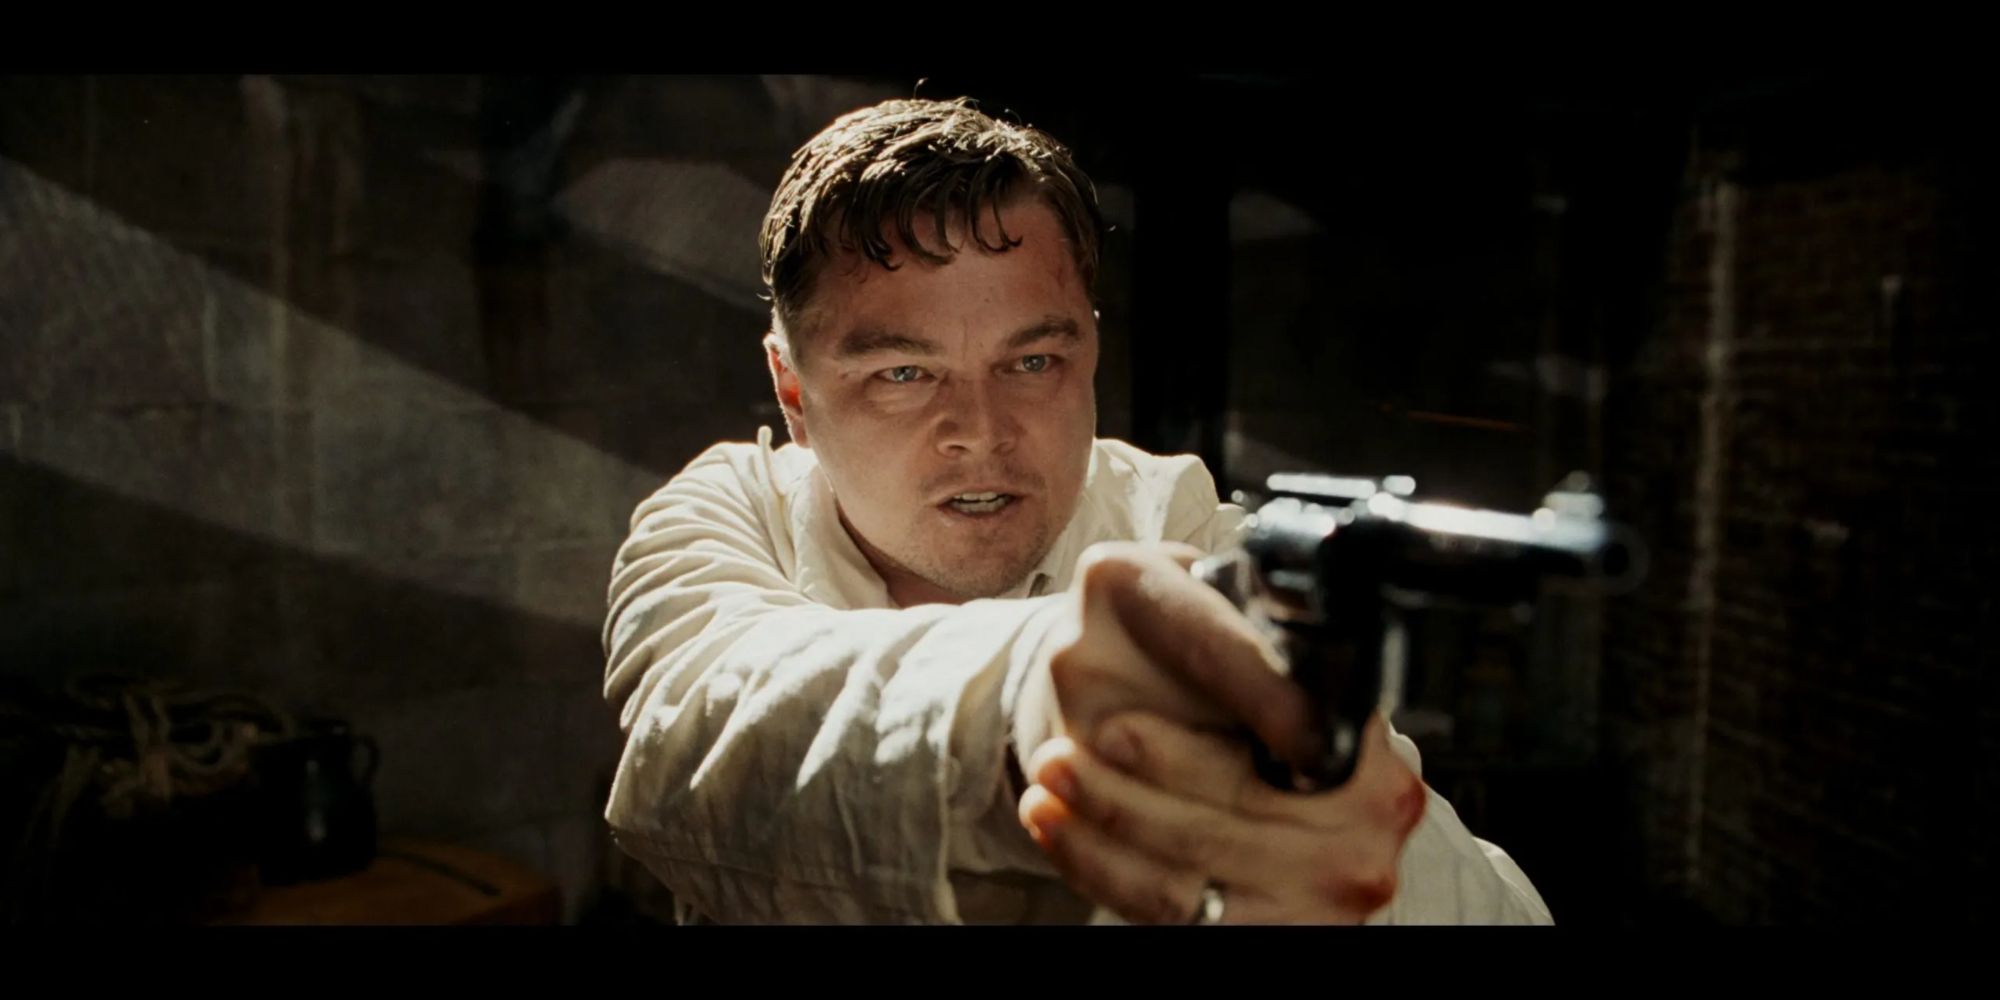 Shutter Island is one of Martin Scorsese's most underrated films